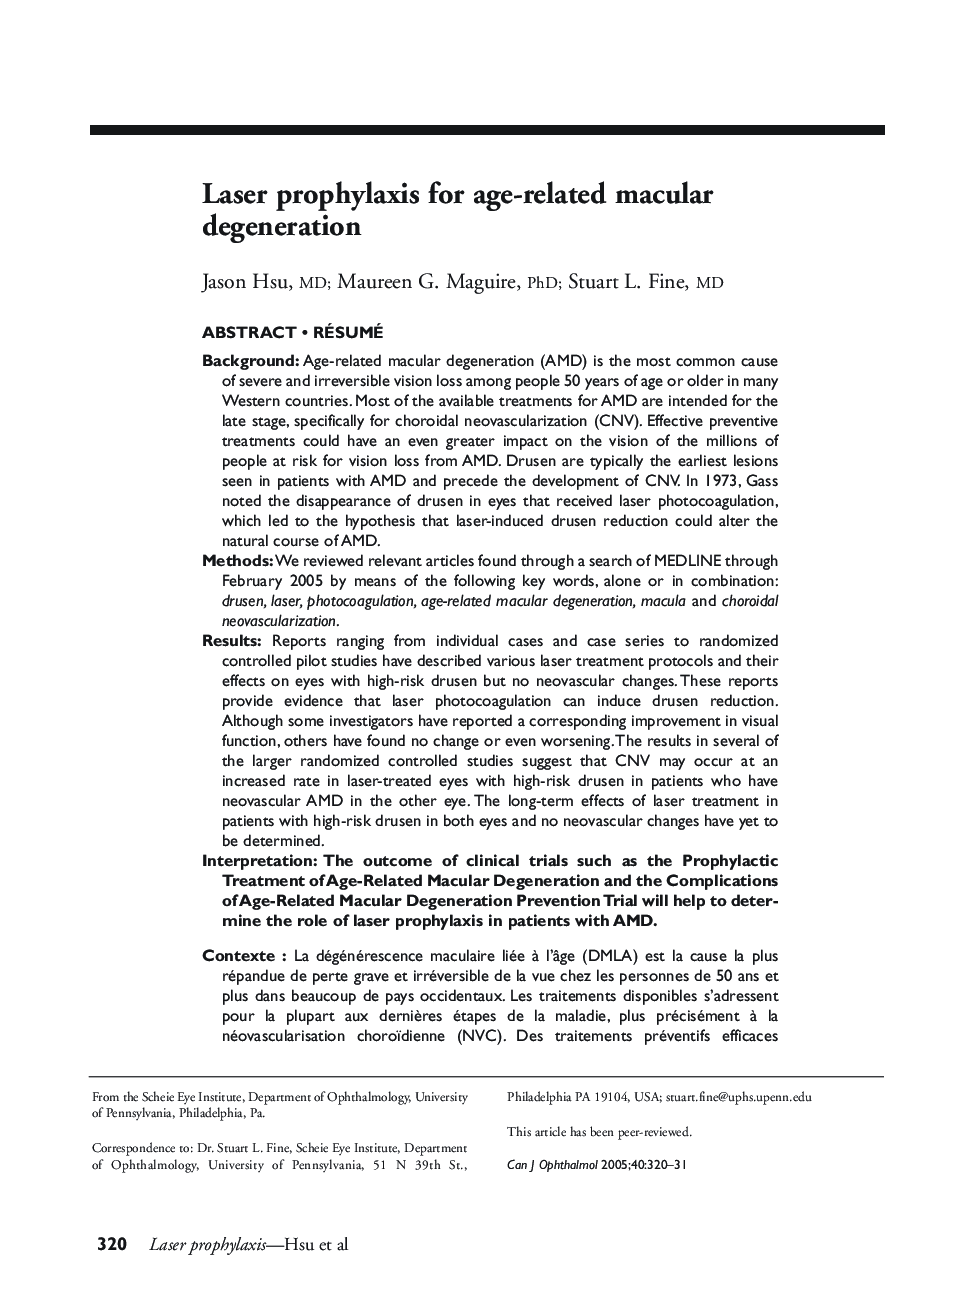 Laser prophylaxis for age-related macular degeneration